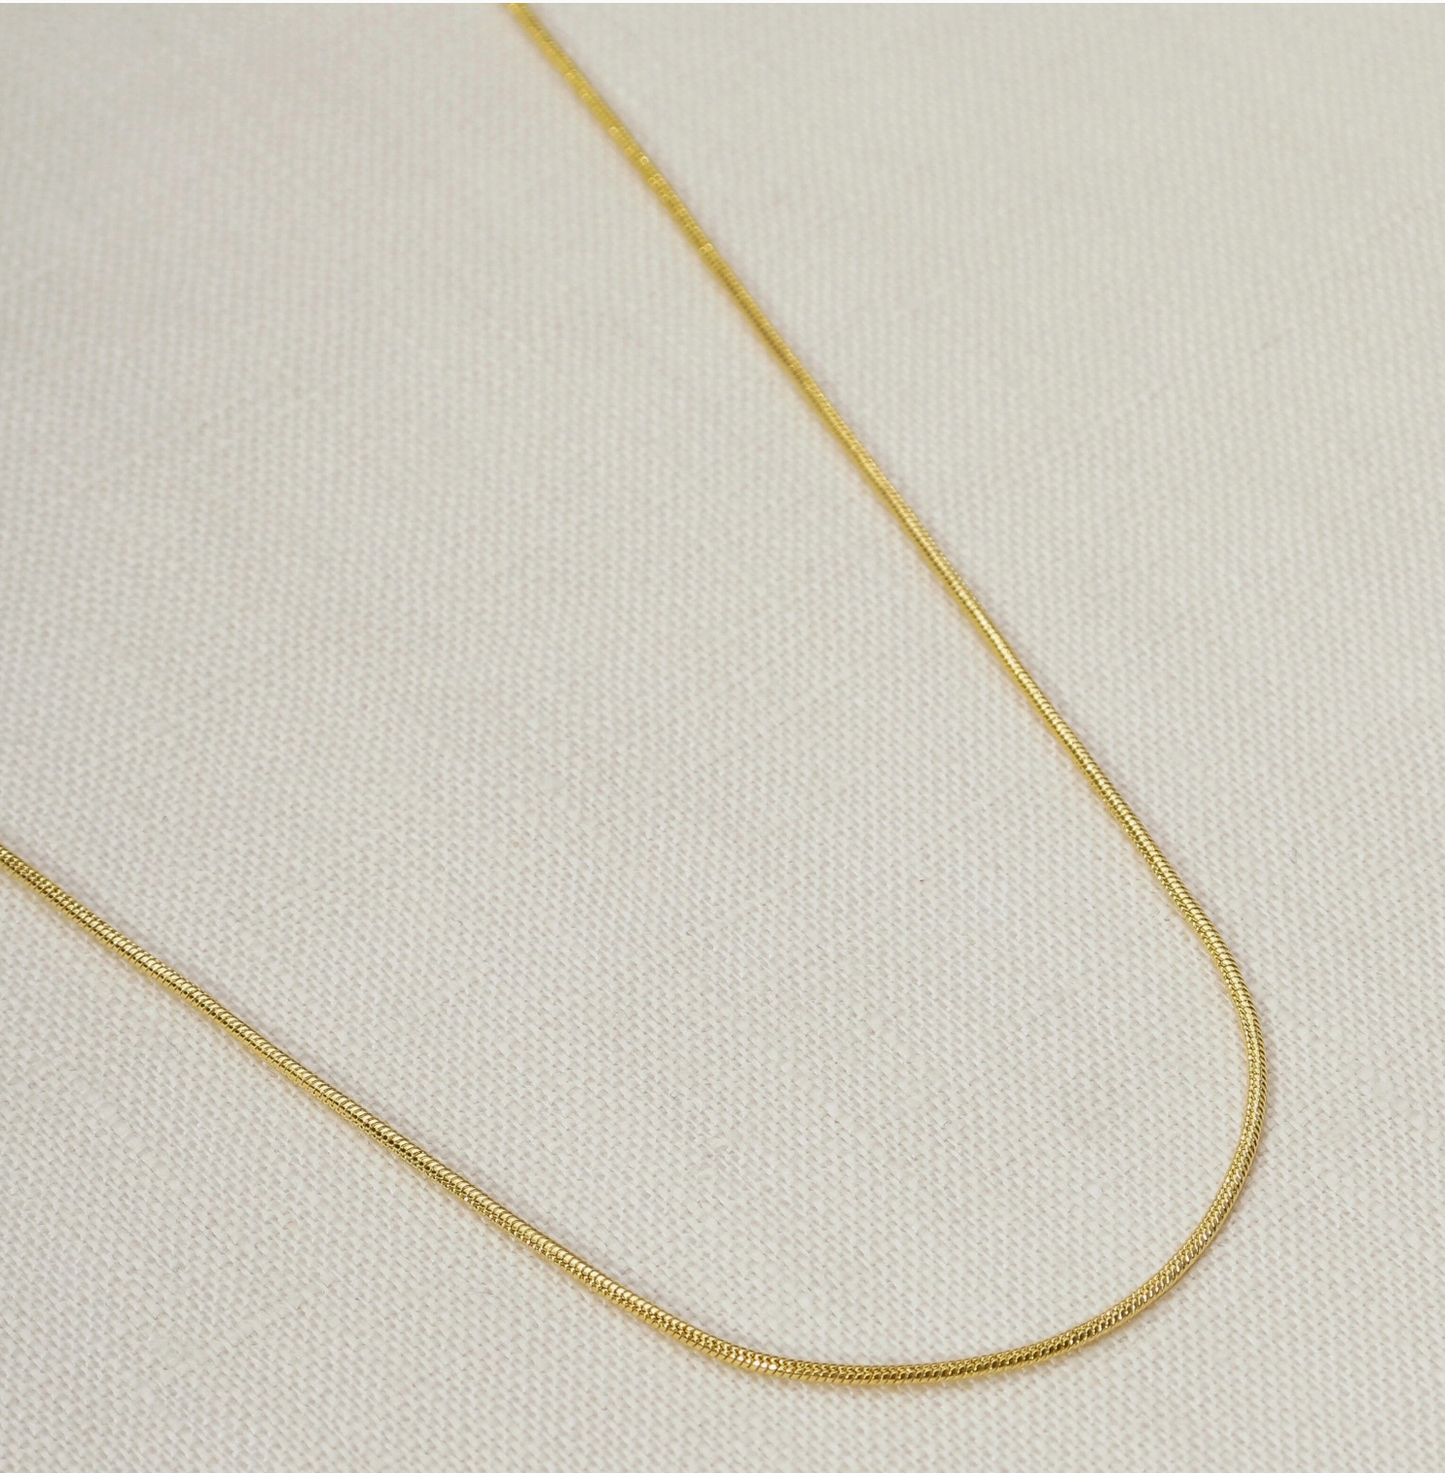 181 18k Gold Filled 1.2 mm Round Snake Chain Necklace